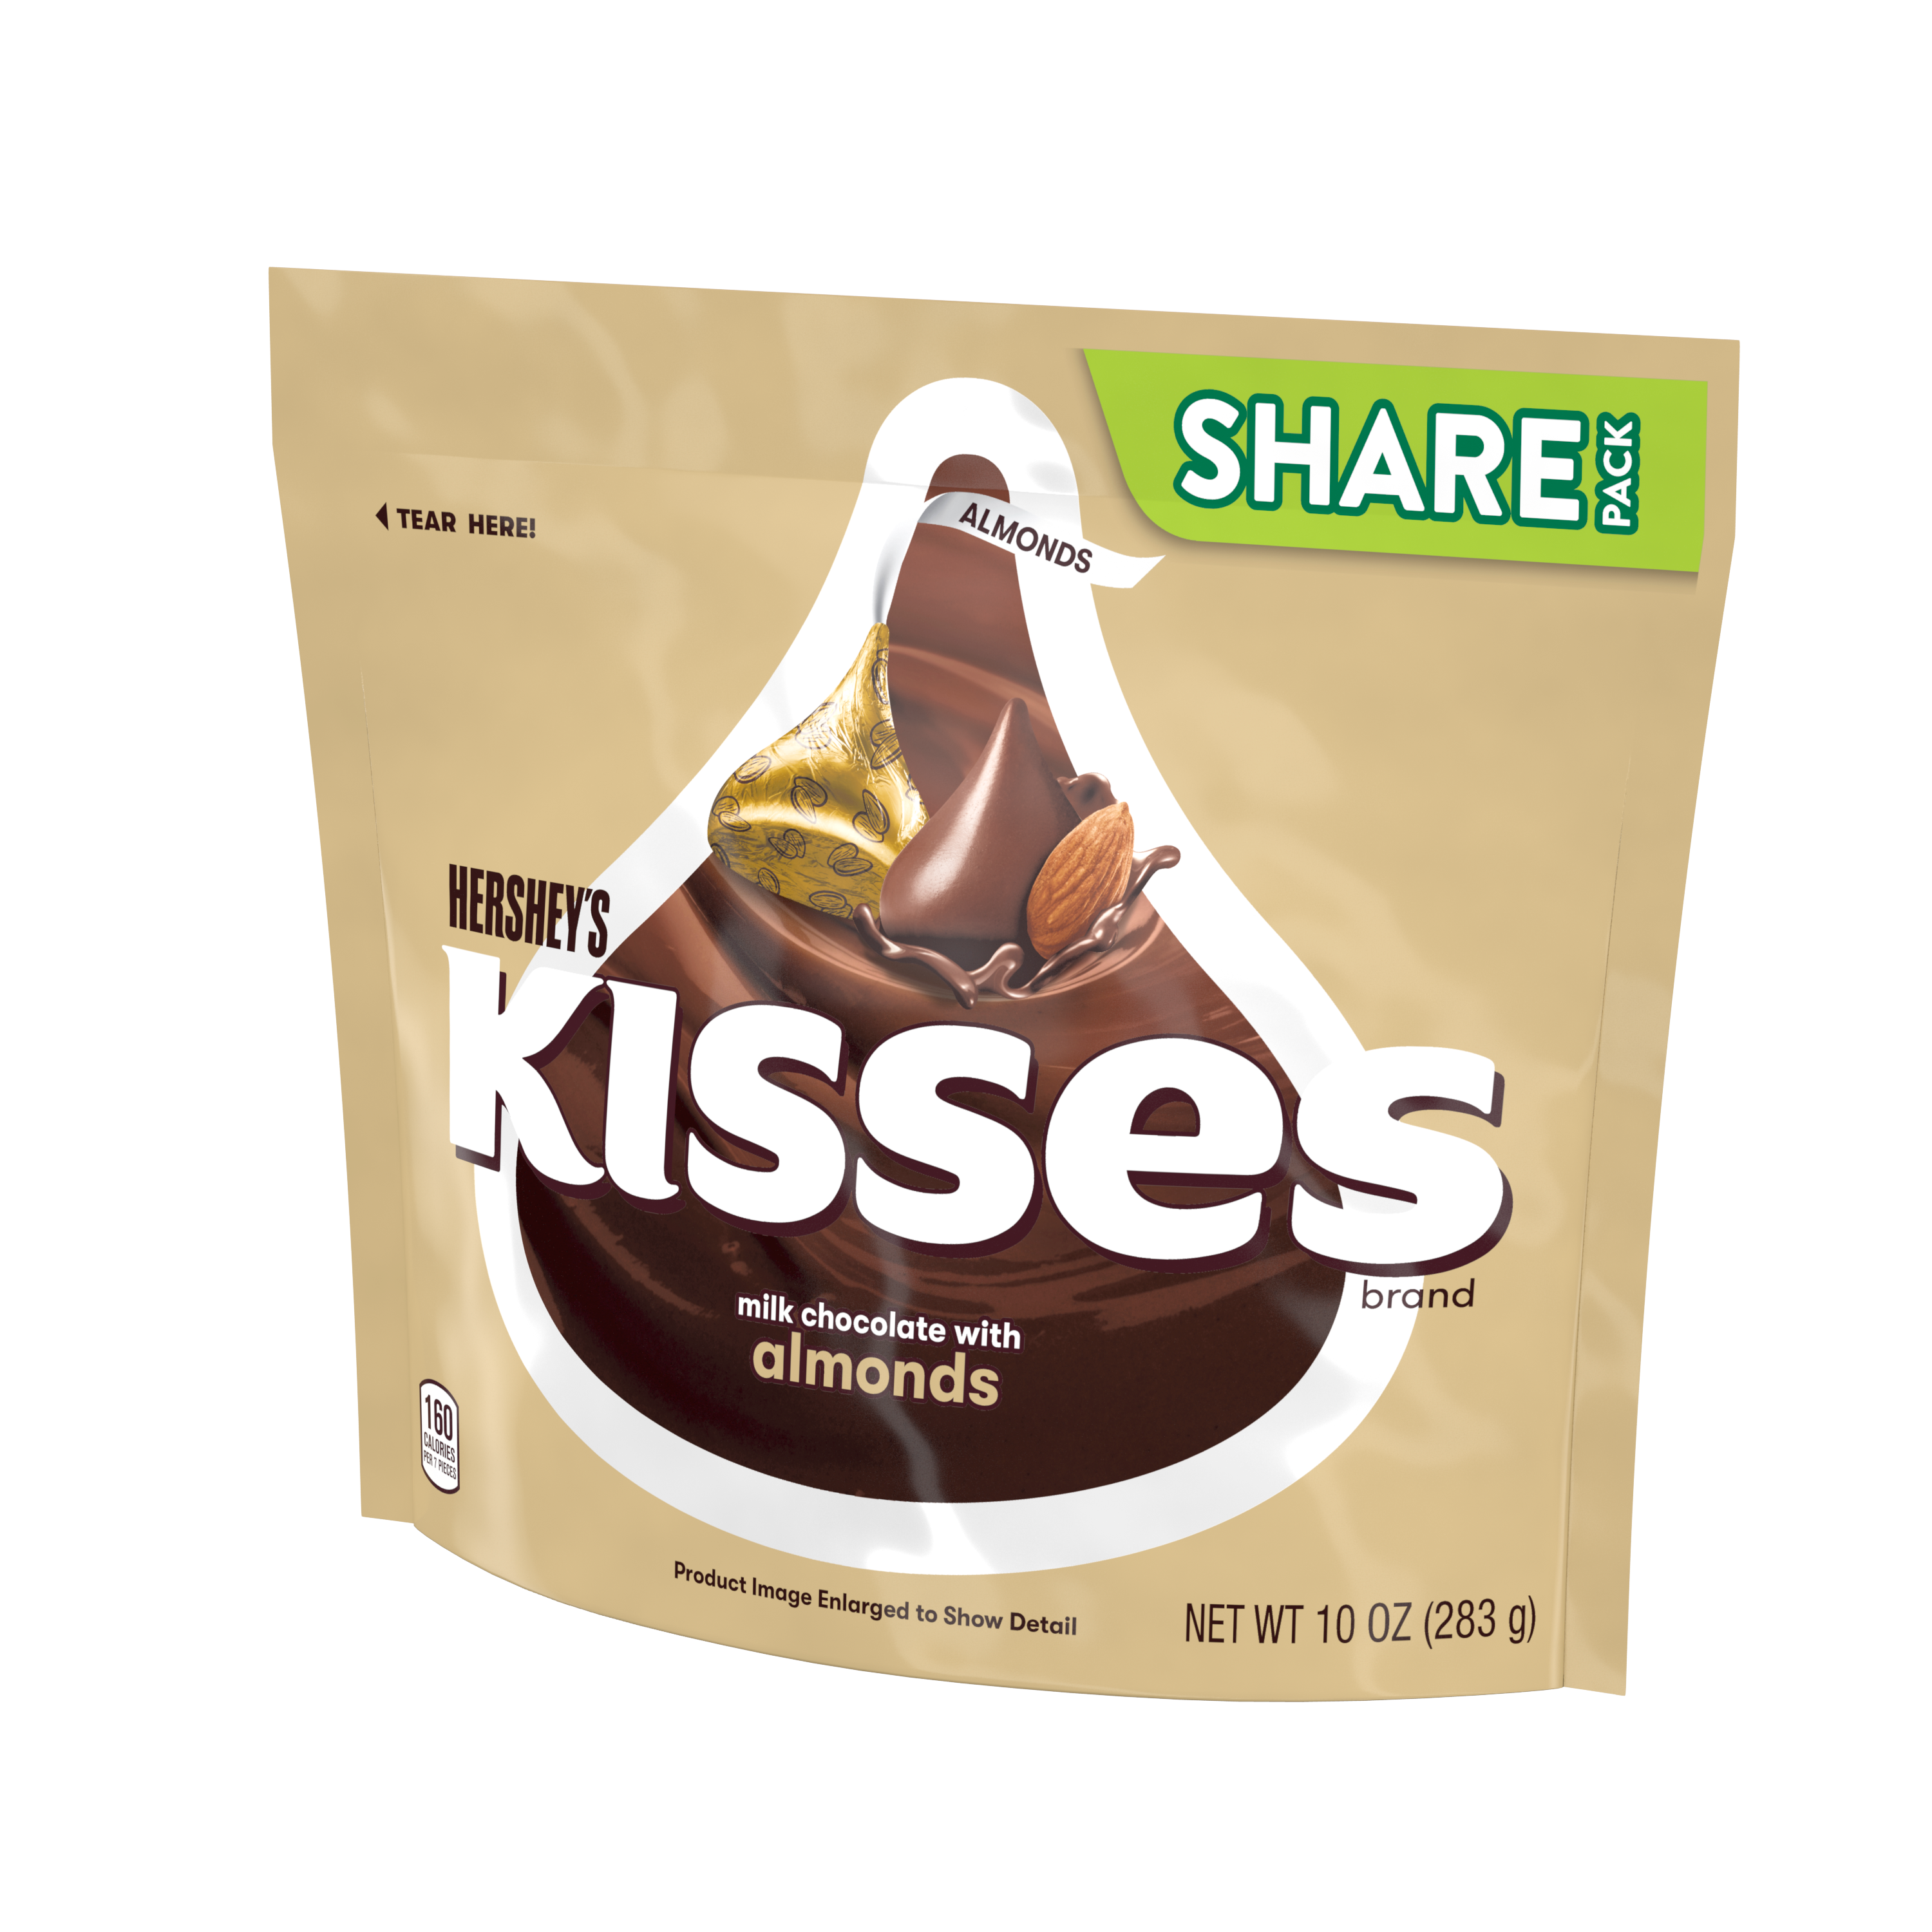 HERSHEY'S KISSES Milk Chocolate with Almonds Candy, 10 oz pack - Right Side of Package